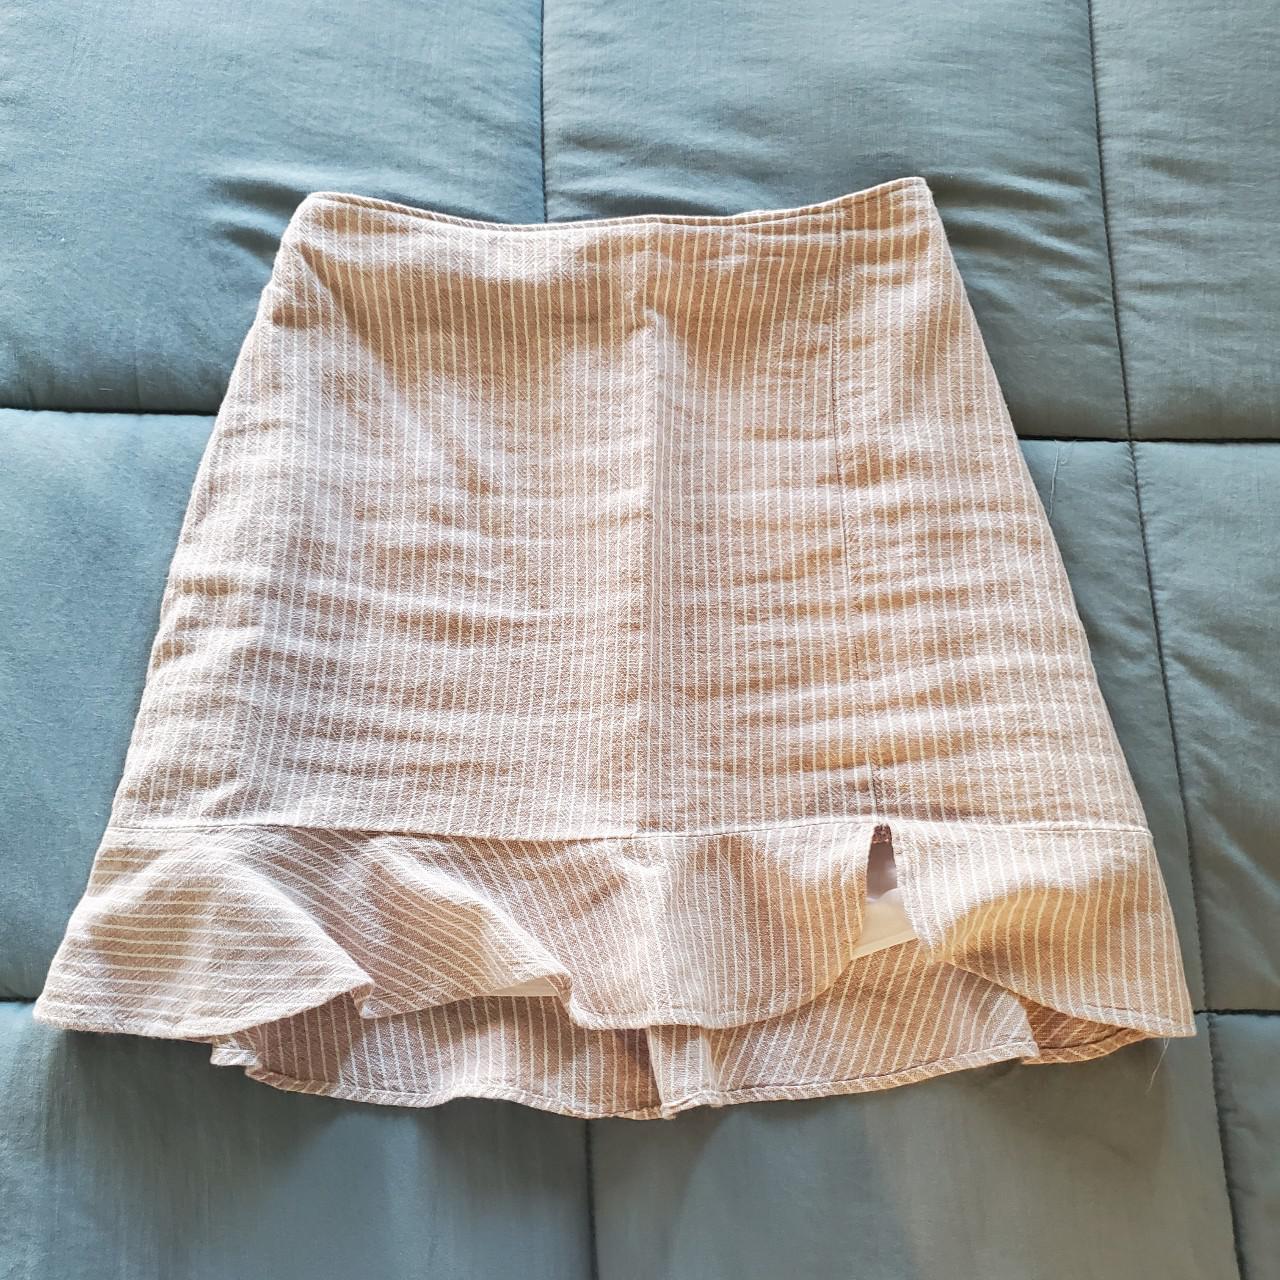 Abercrombie & Fitch Women's Tan and White Skirt (2)